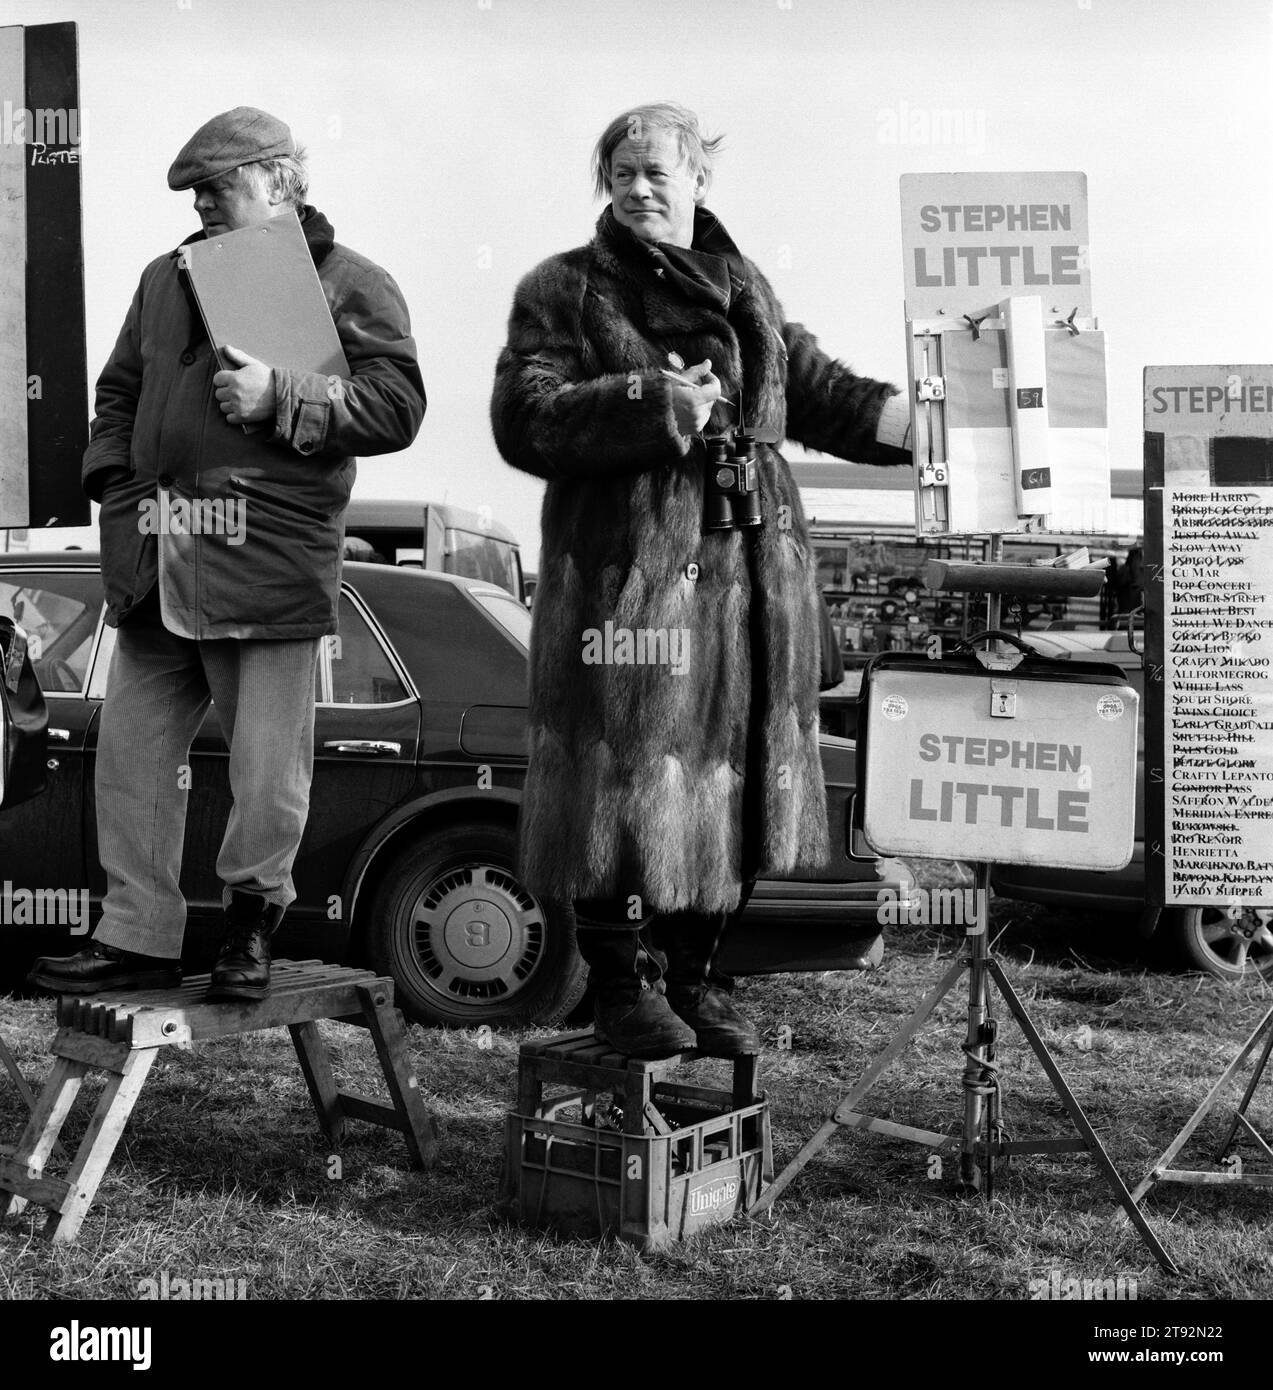 Hare Coursing UK 2000s. Stephen Little independant Rails Bookmaker taking bets on the coursing event. He wears his trademark real fur Musquash coat at the Waterloo Cup. He is with Bookies Clerk. His Bentley car in rear of image. Near Altcar, Lancashire England UK 2002  2000s HOMER SYKES Stock Photo